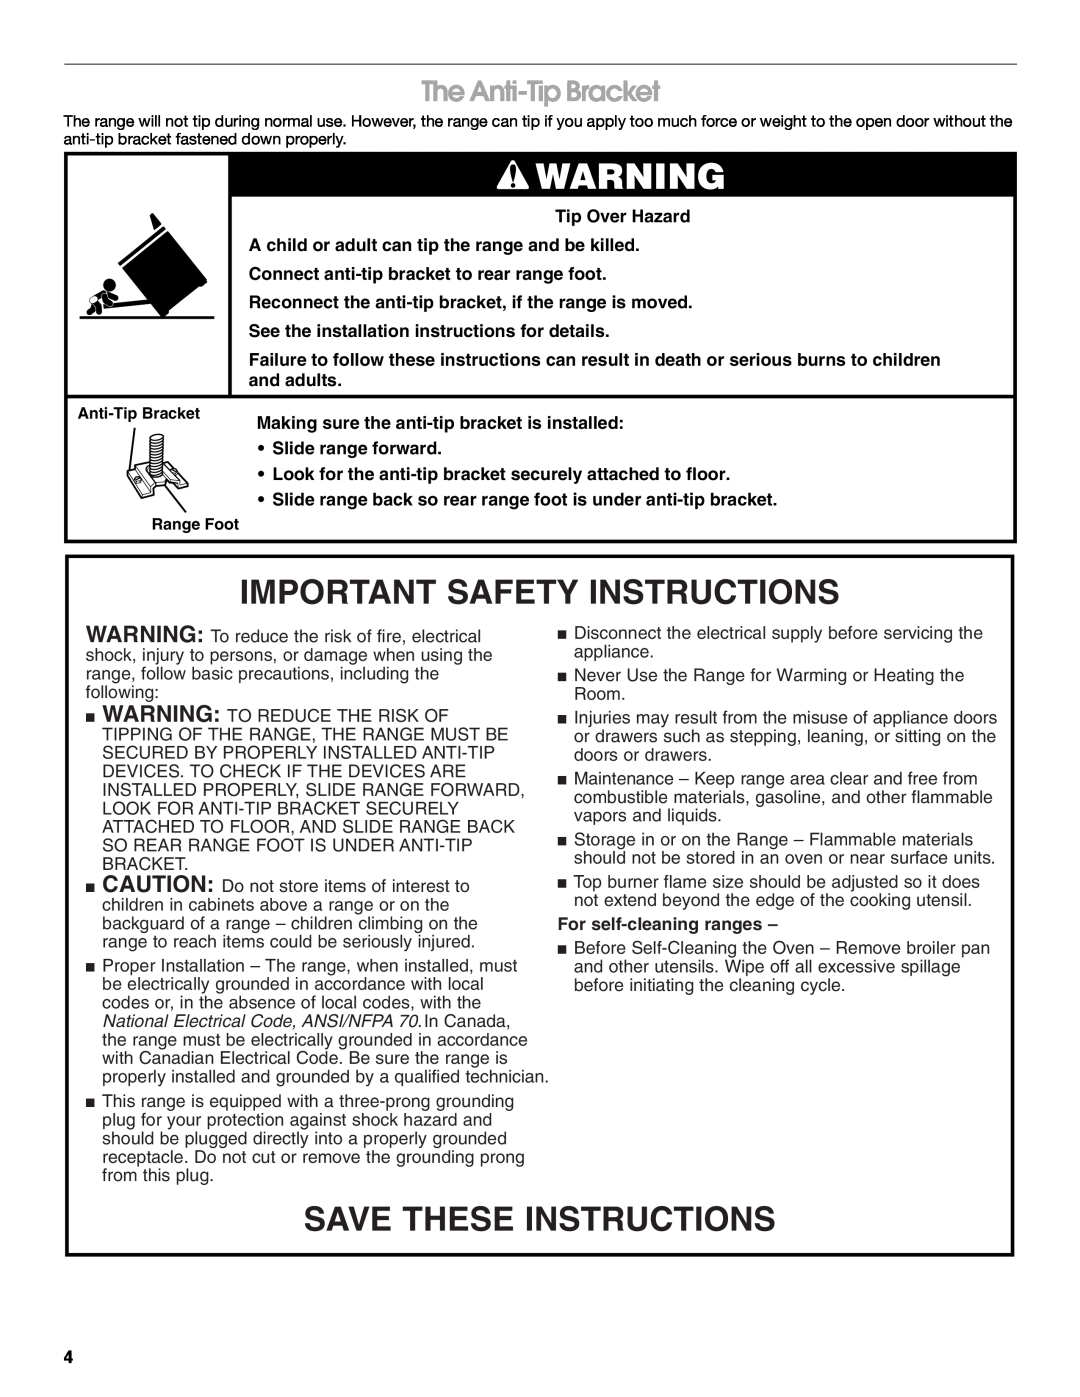 Whirlpool 98012565 Important Safety Instructions, Save These Instructions, The Anti-Tip Bracket, For self-cleaning ranges 